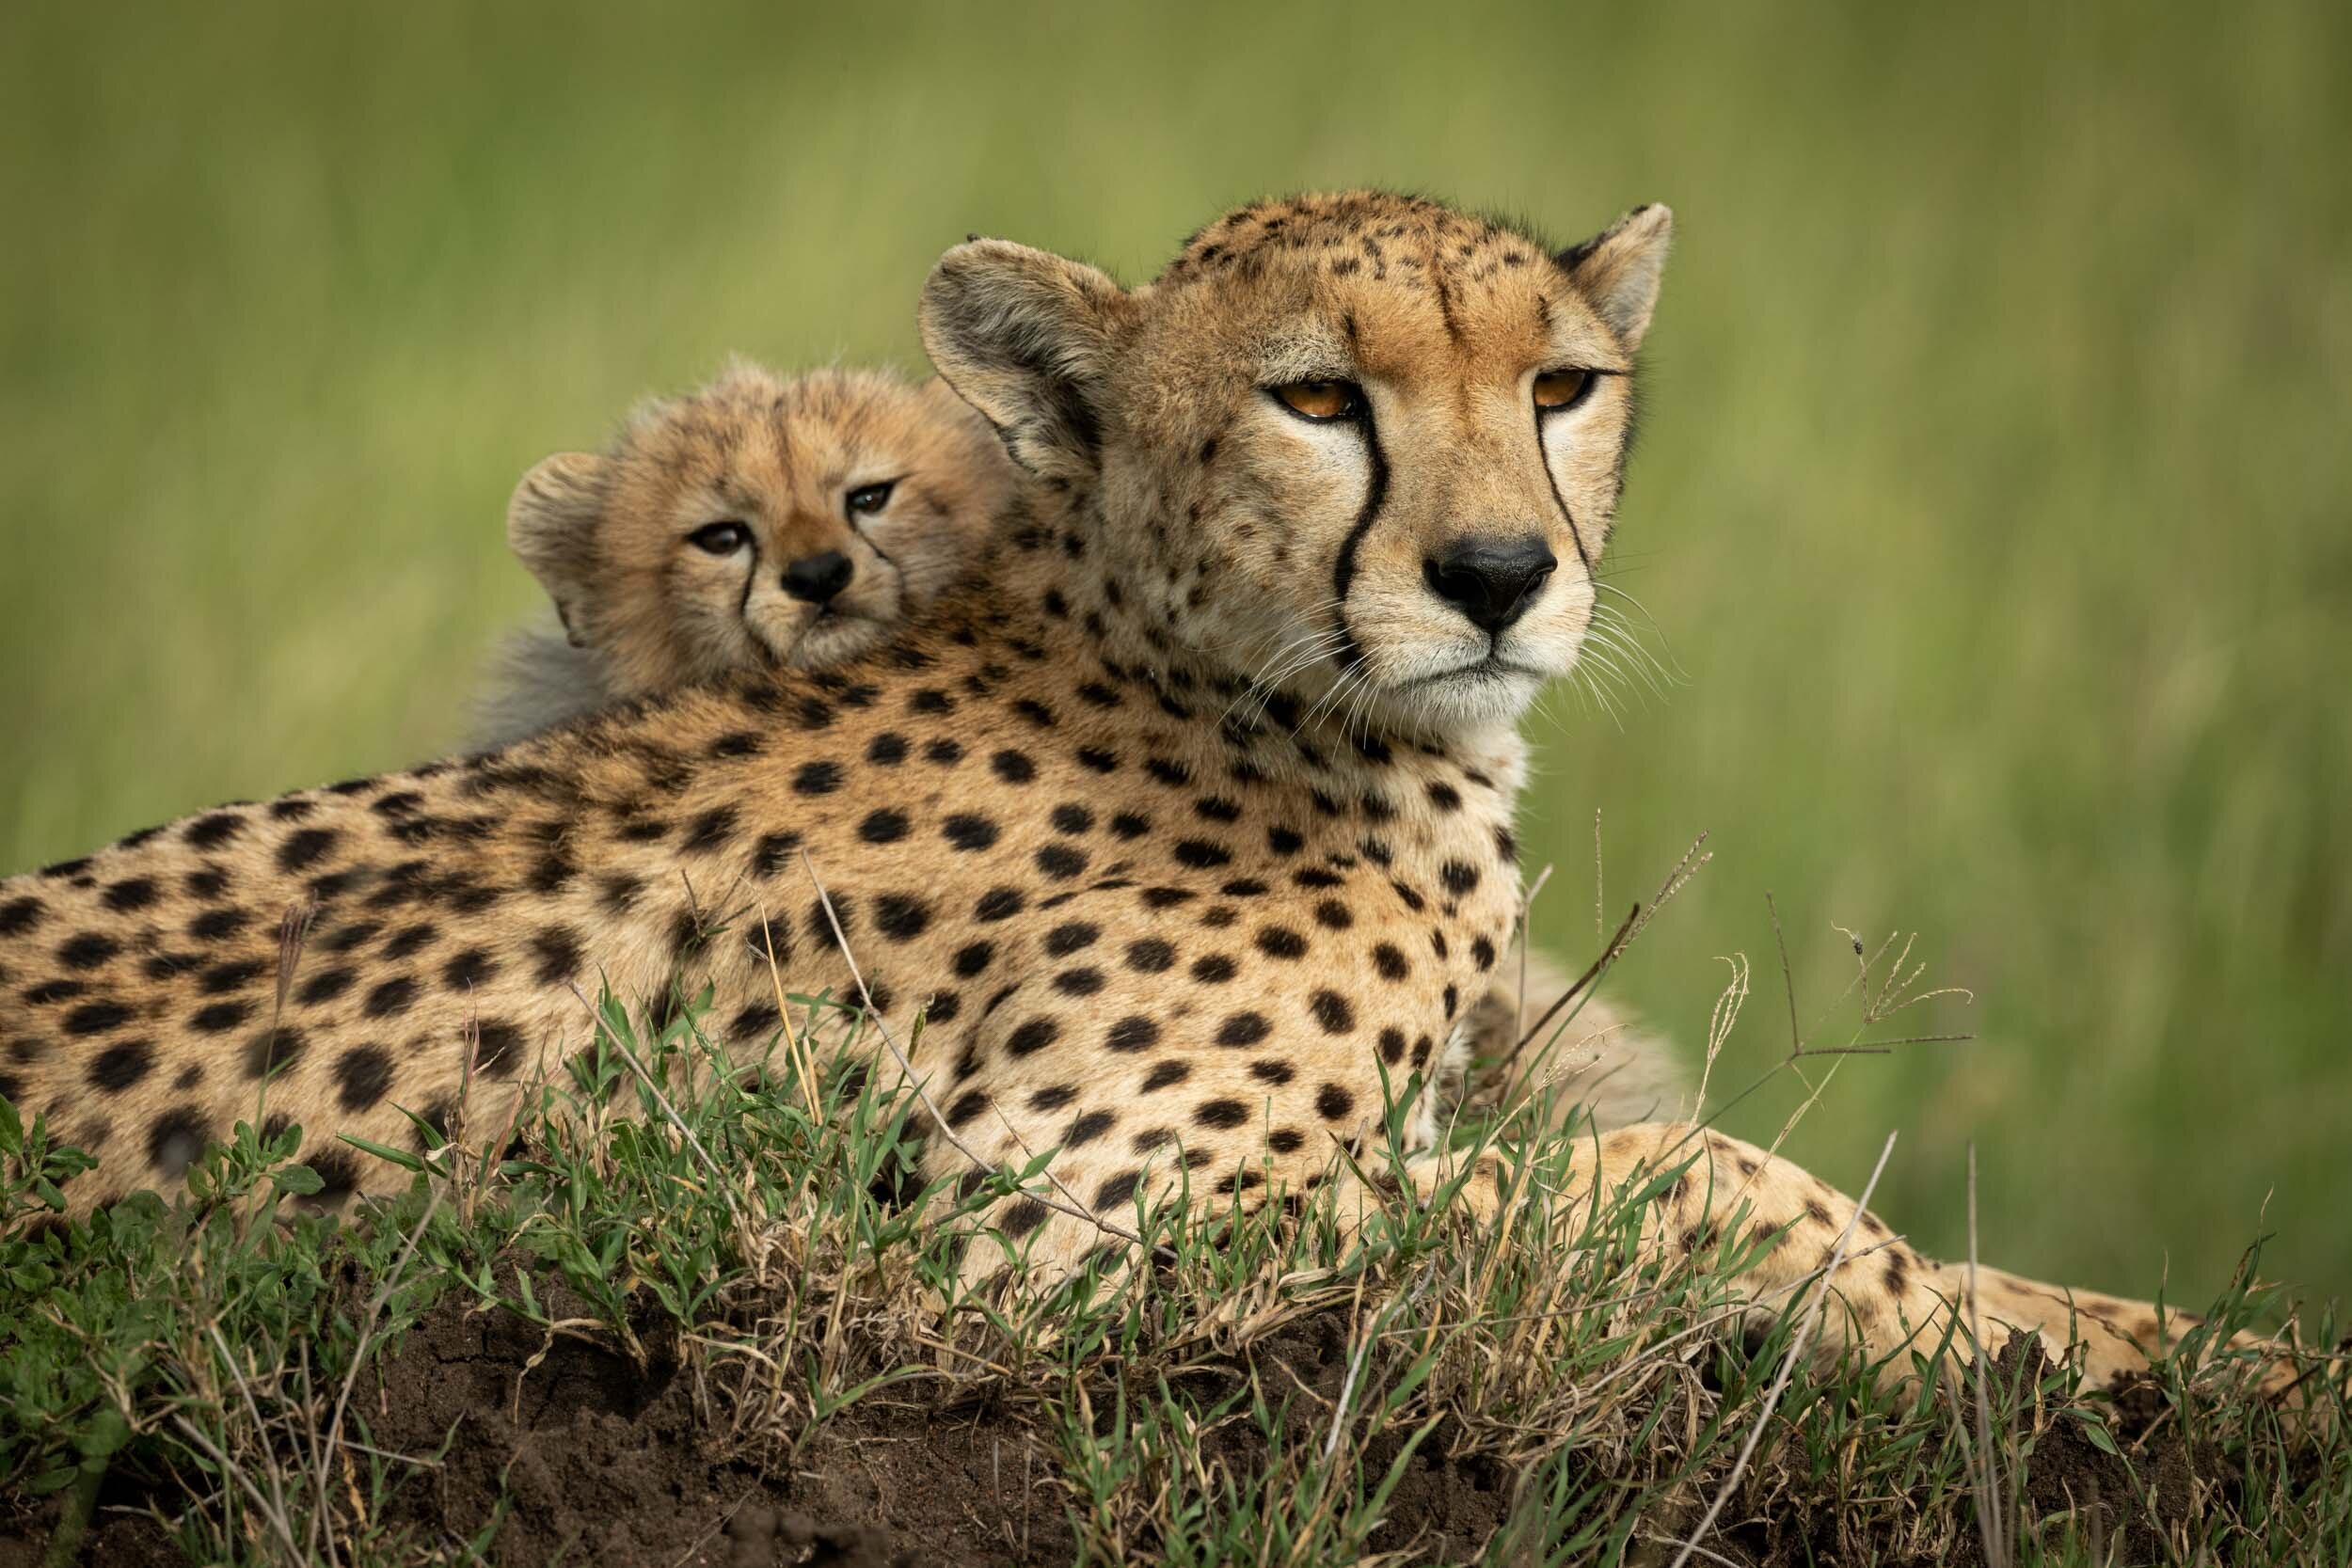 Close-up of cub on back of cheetah: 73 downloads